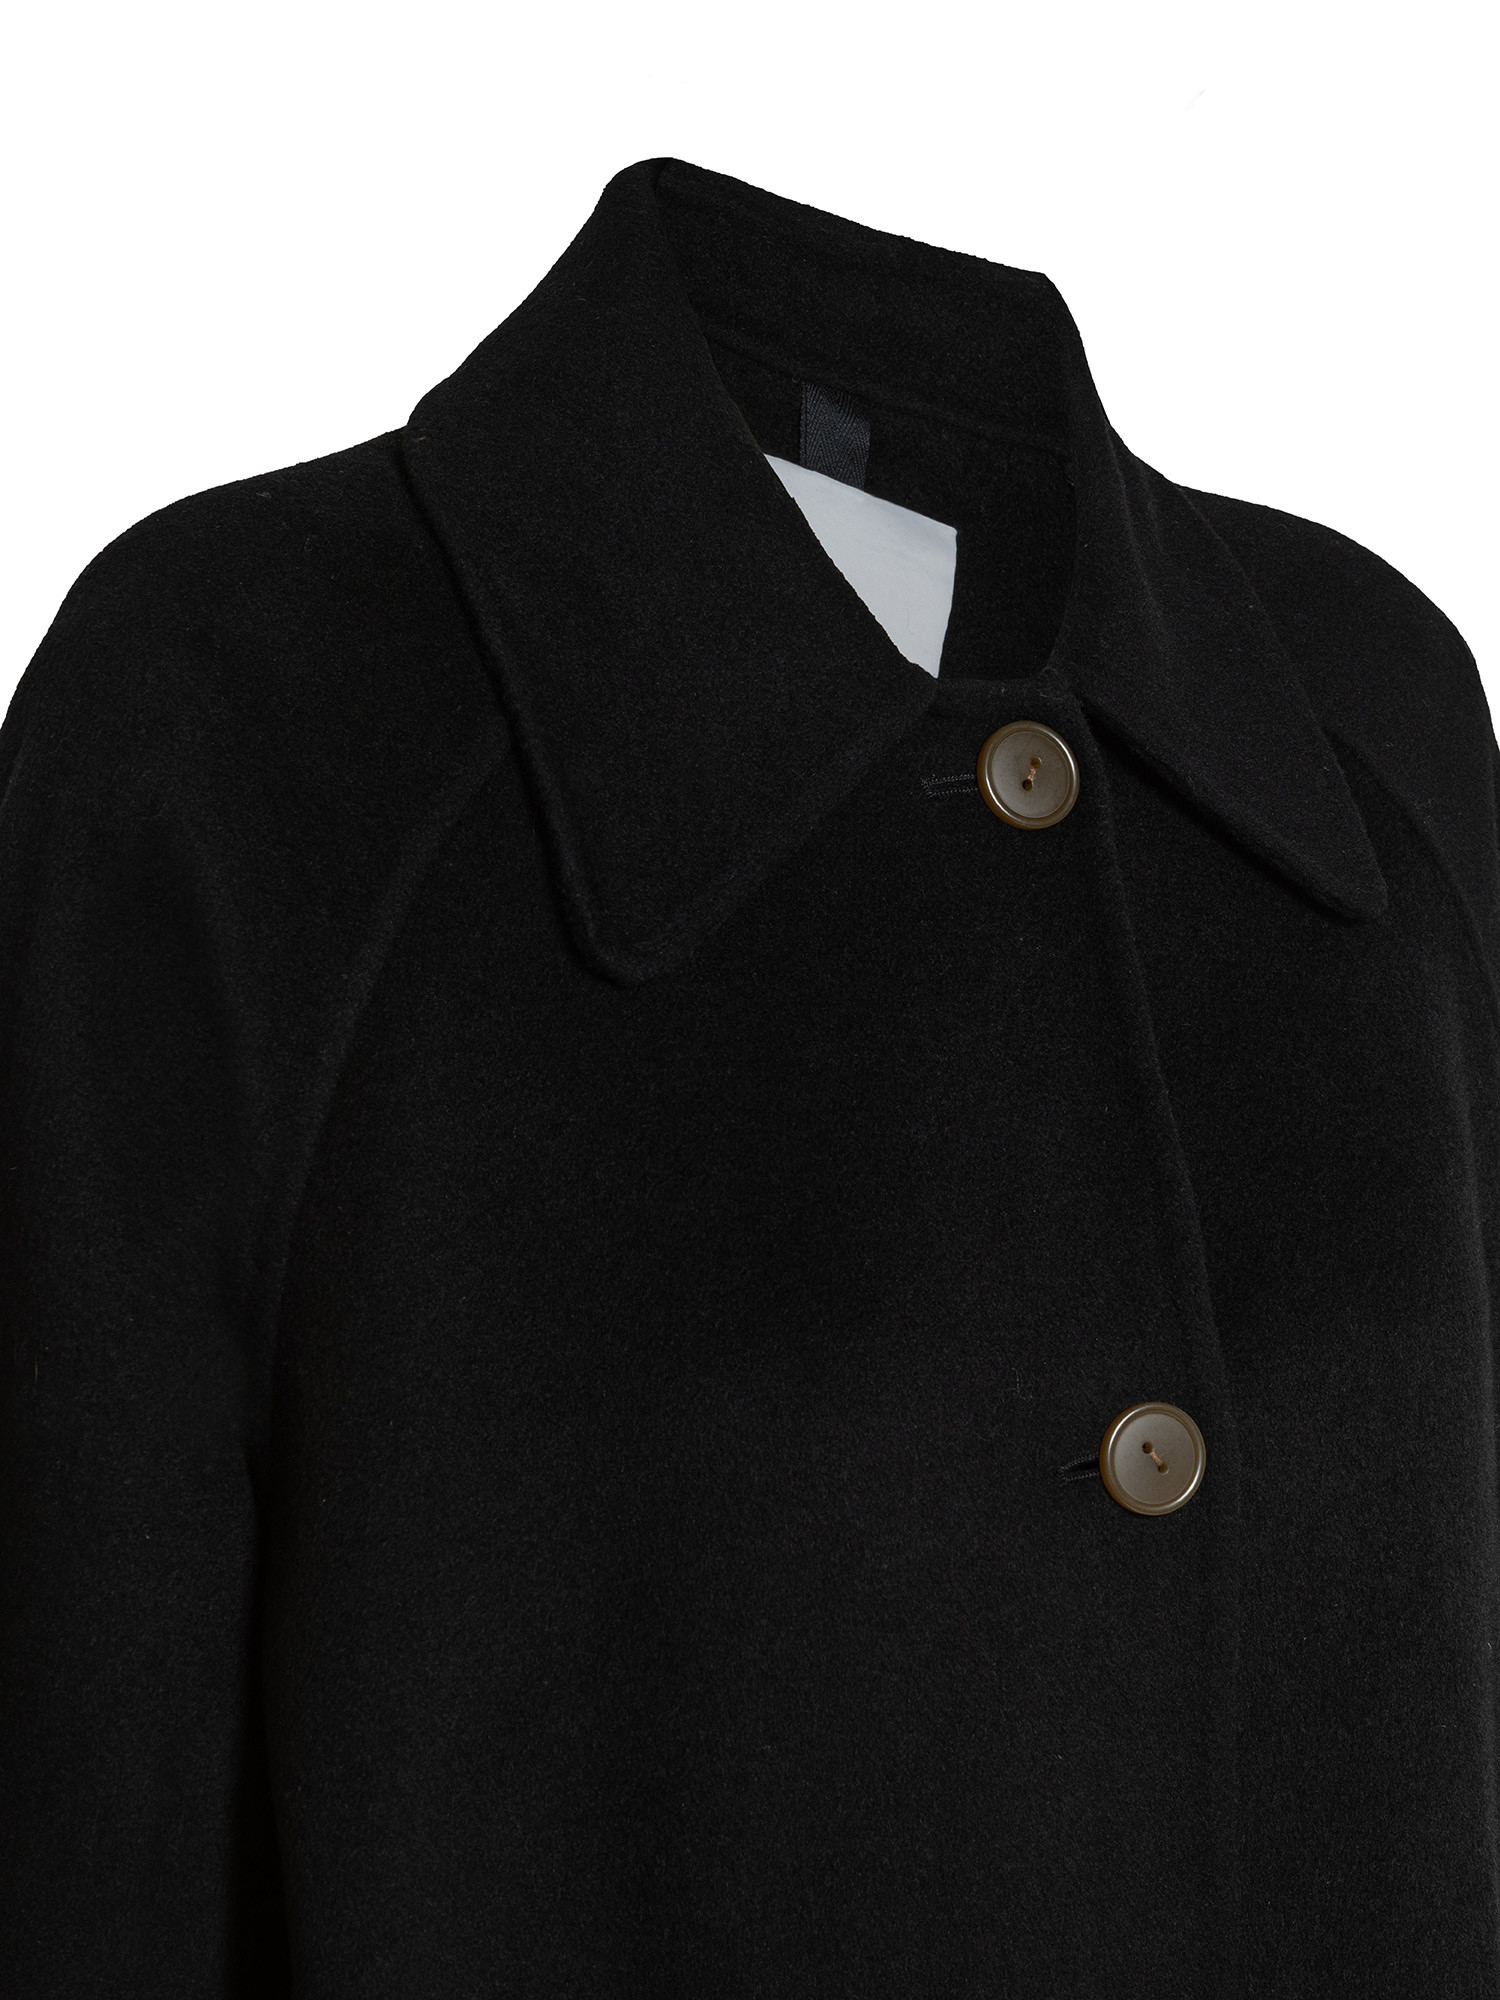 Double single-breasted coat sewn by hand, Black, large image number 2